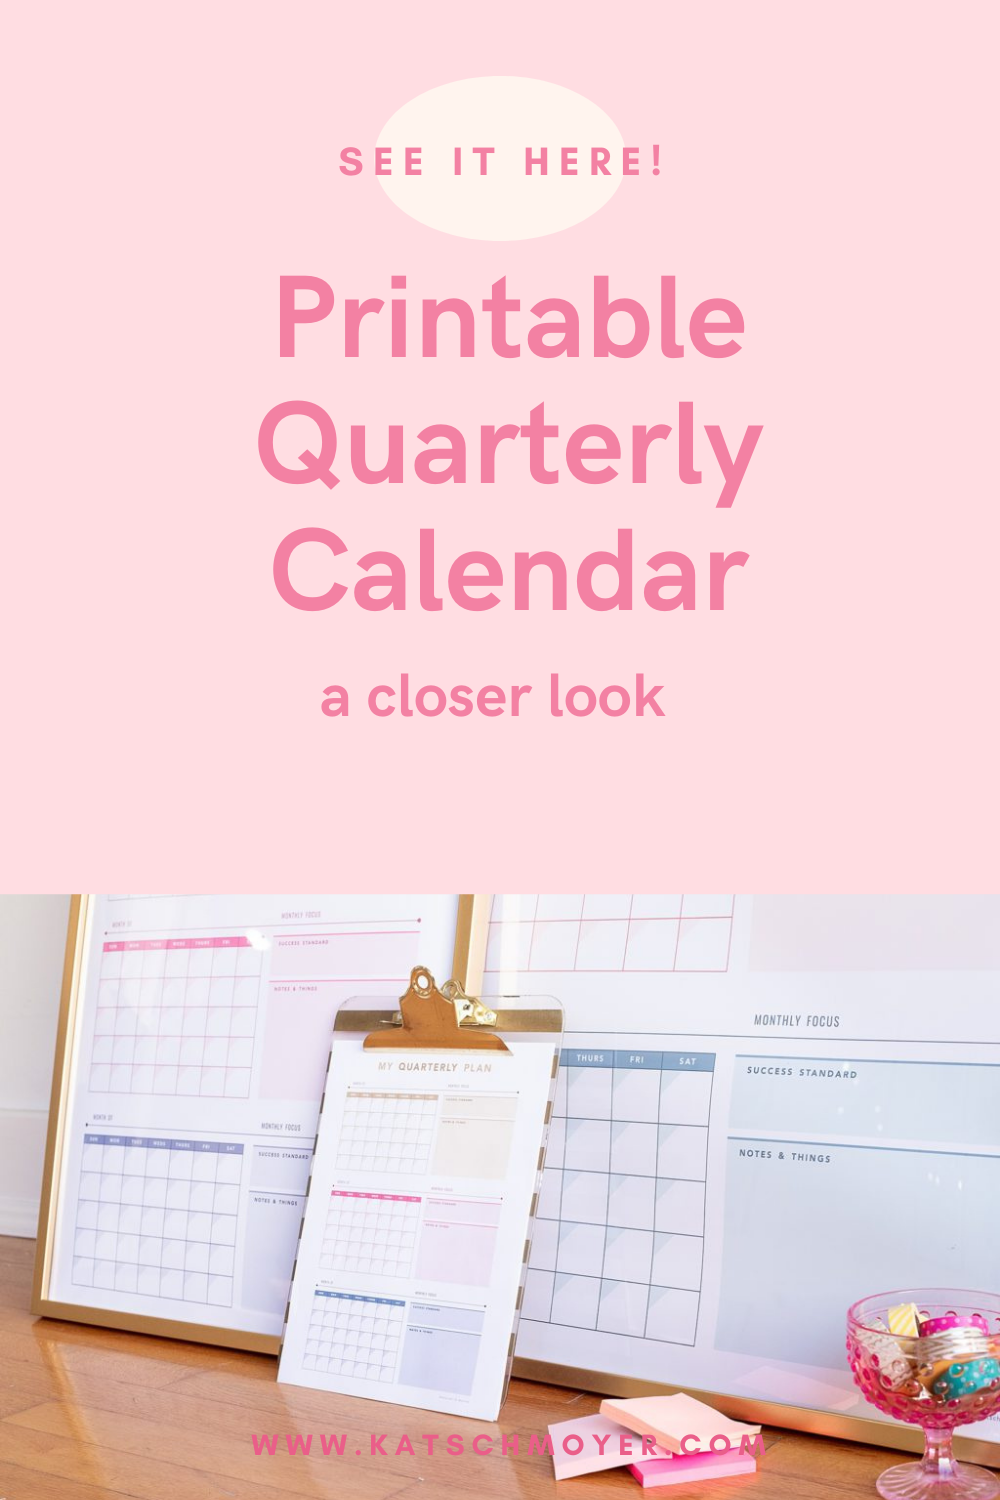 A closer look at the downloadable quarterly printable calendar for 2022 from Kat Schmoyer, business coach and integrator for small businesses